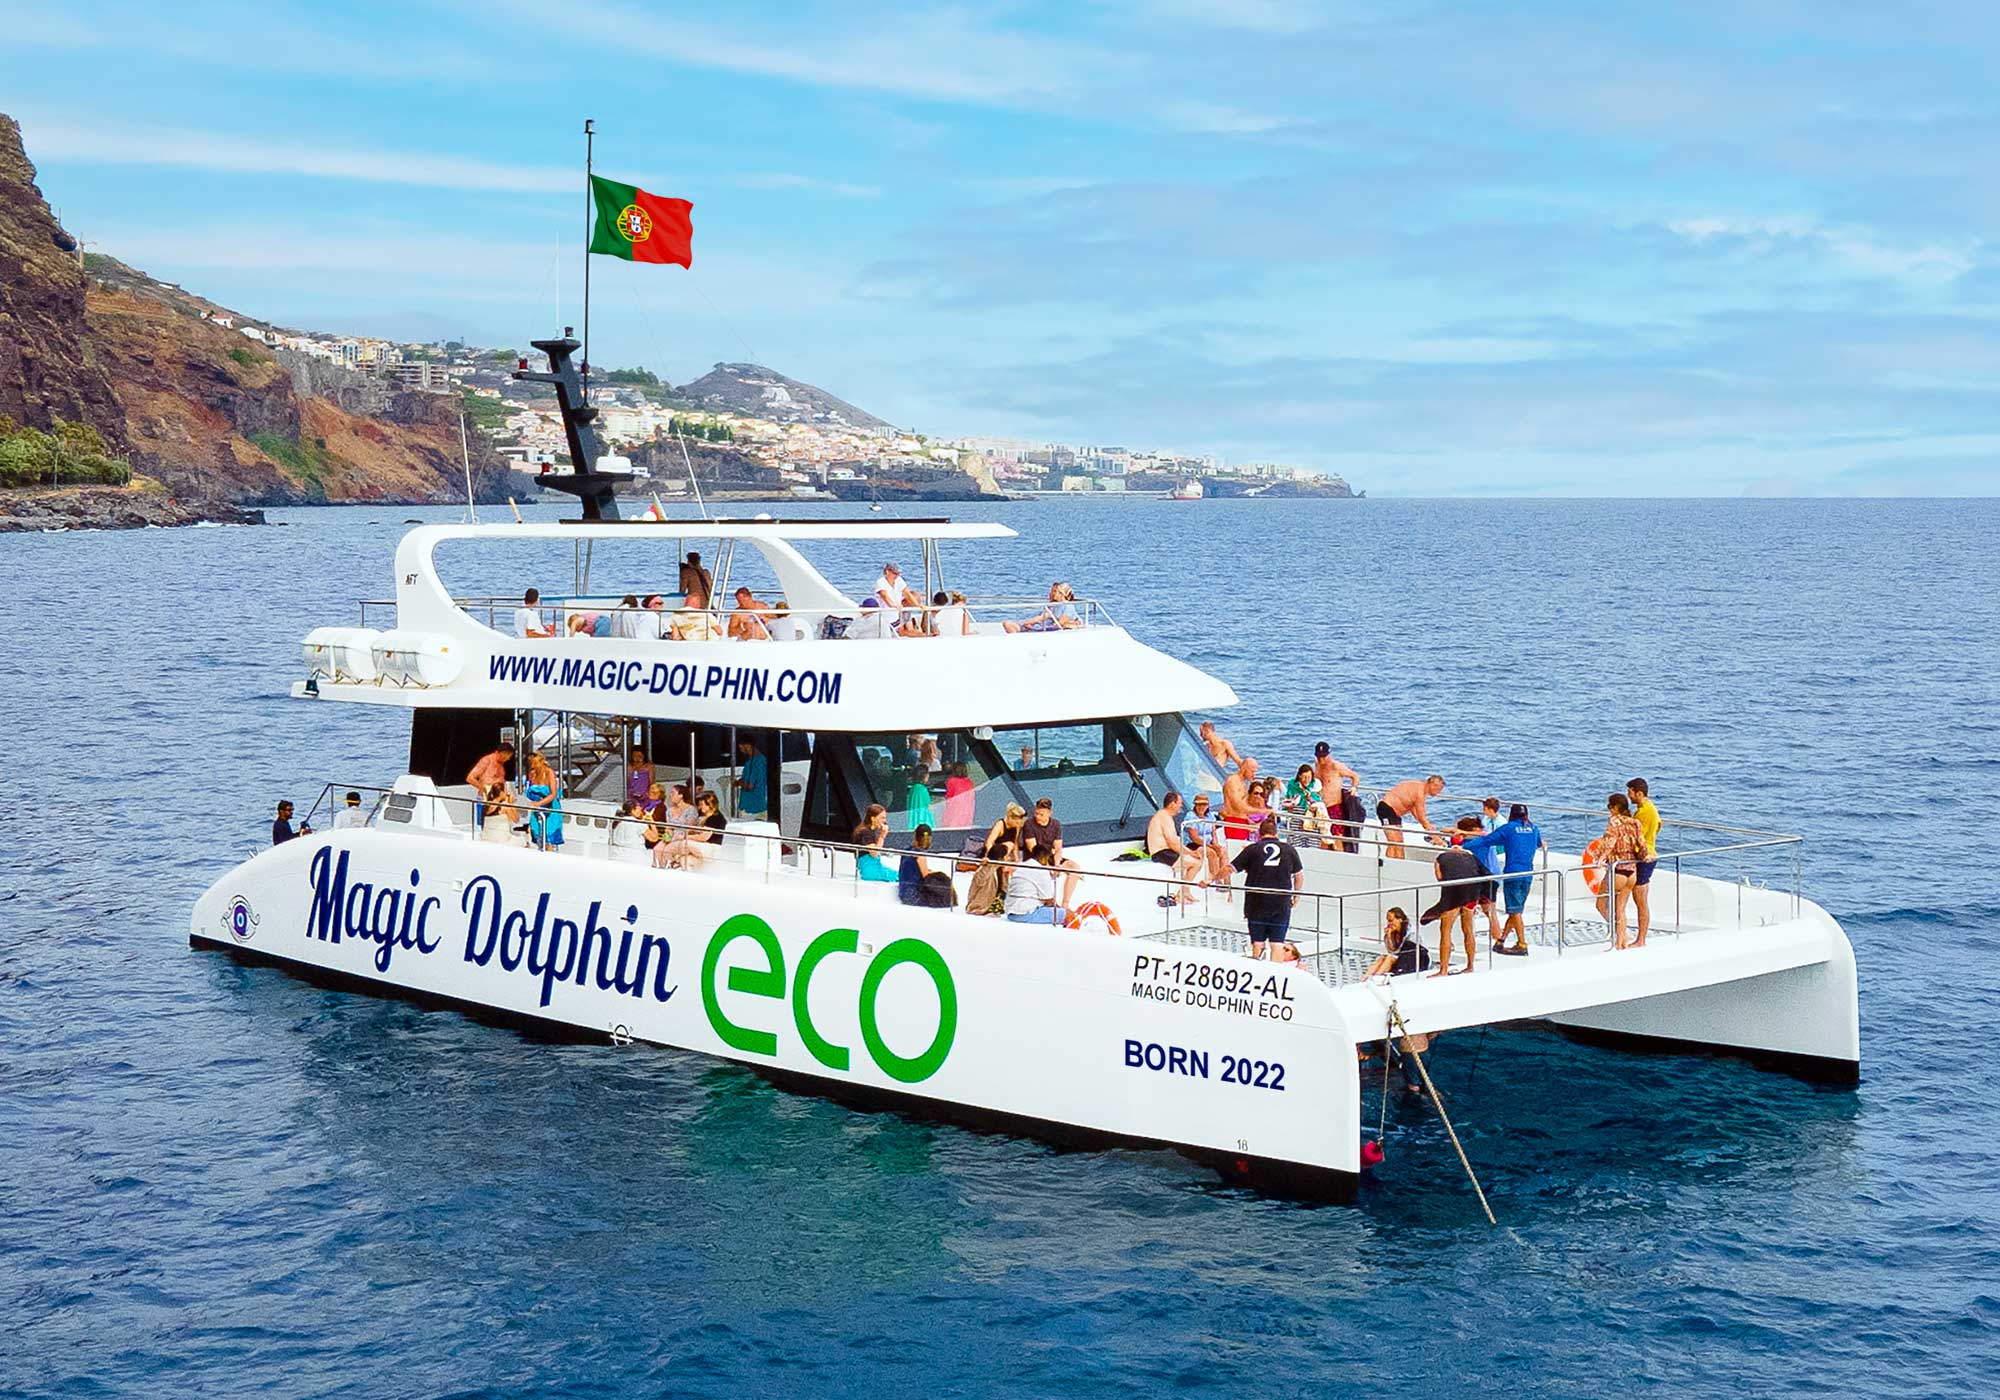 Madeira dolphin and whale watching onboard an ecological catamaran with hybrid-electric engines.